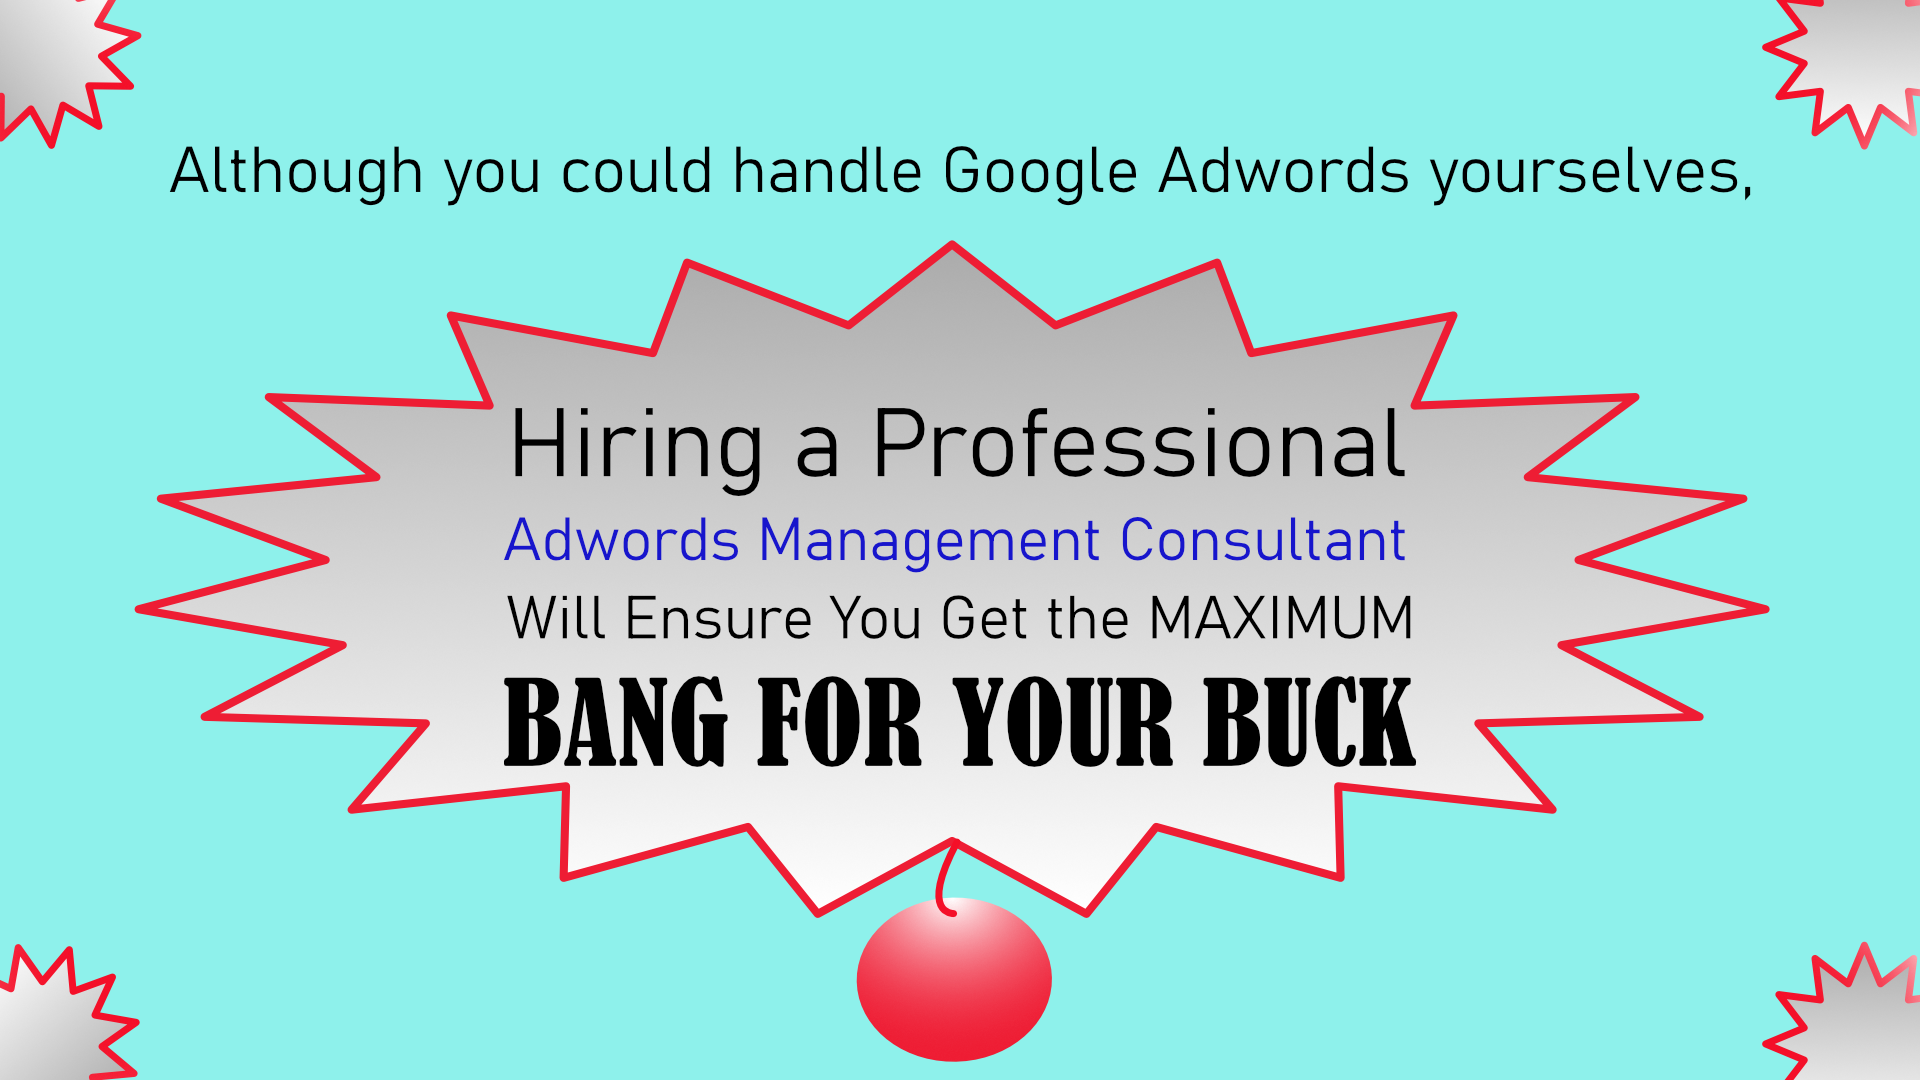 Benefits of Hiring an Adwords Management Consultant